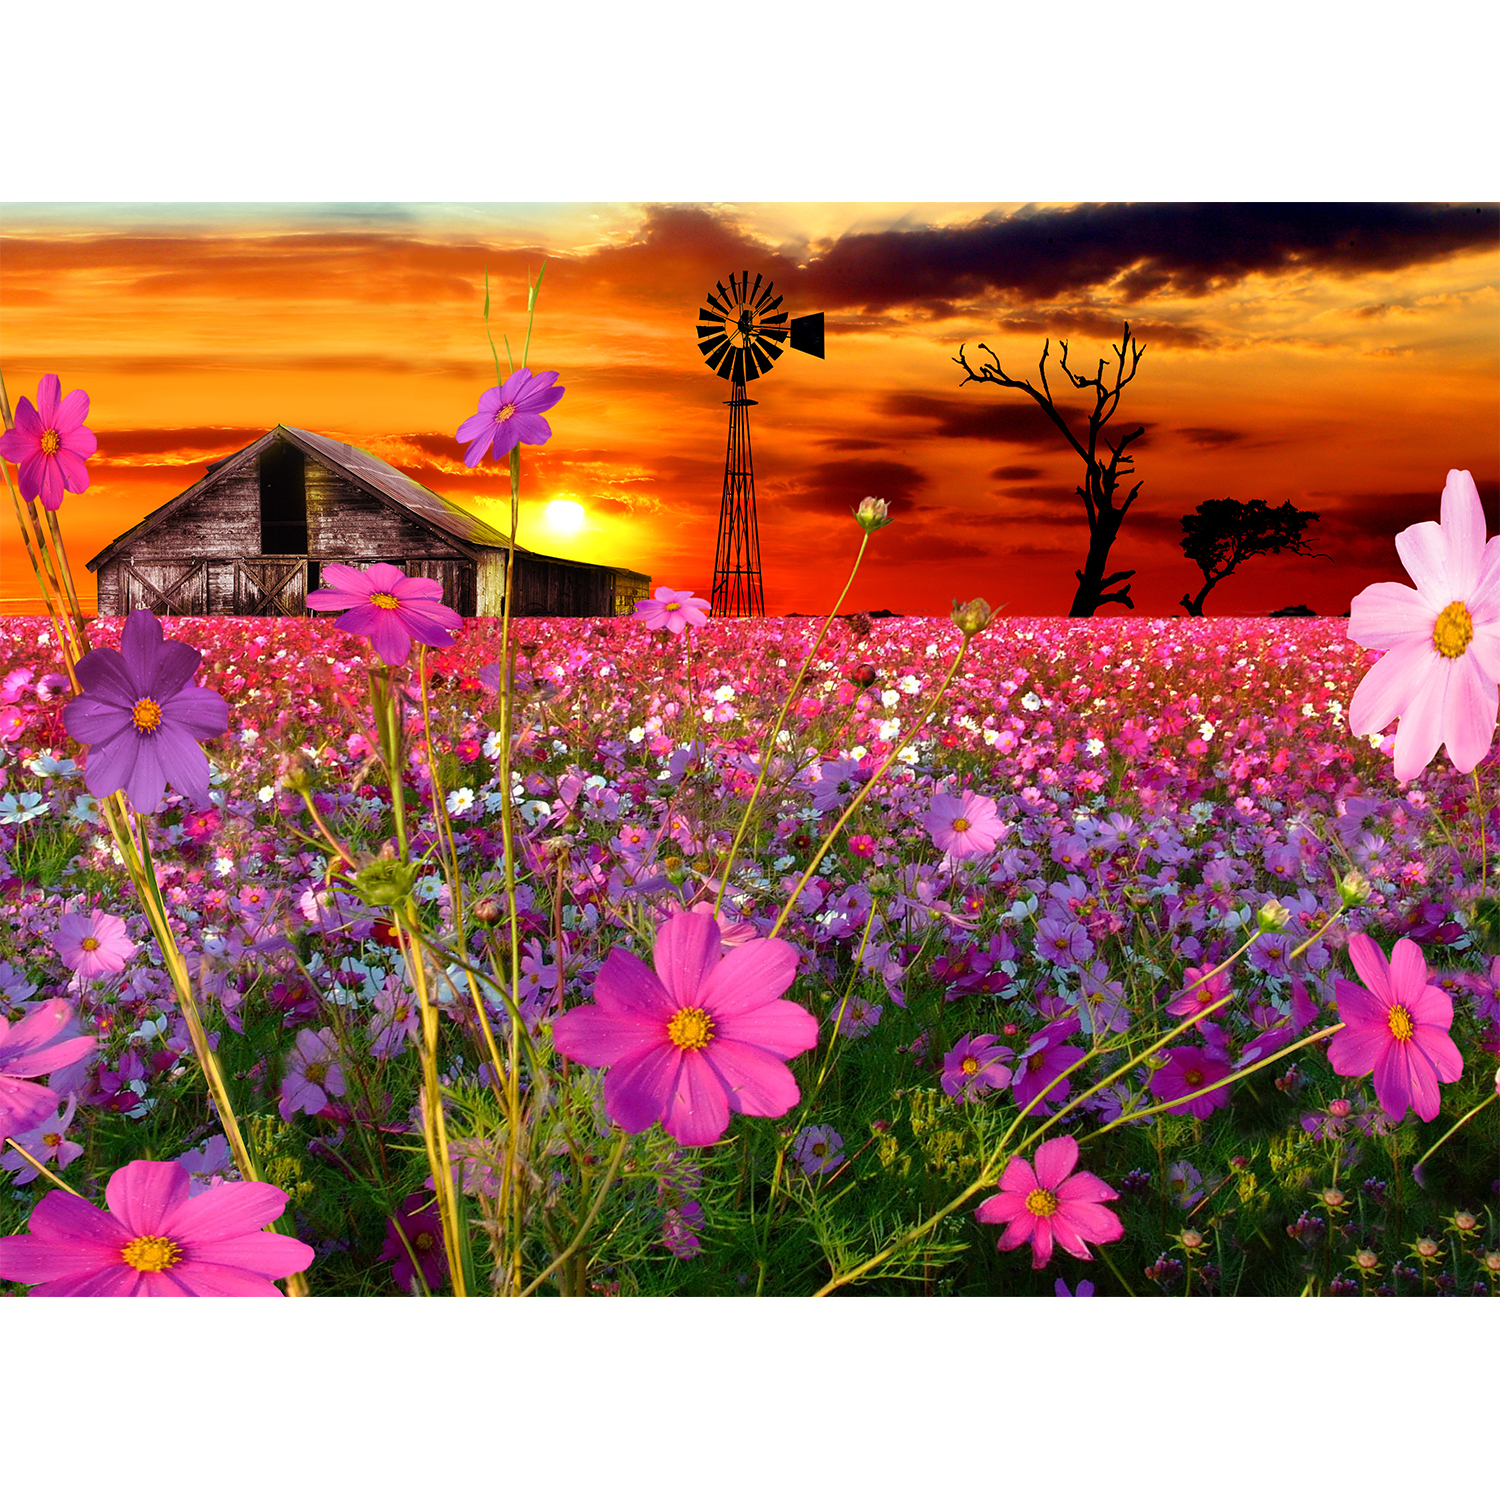 sunset in with Cosmos, a windmill and barn